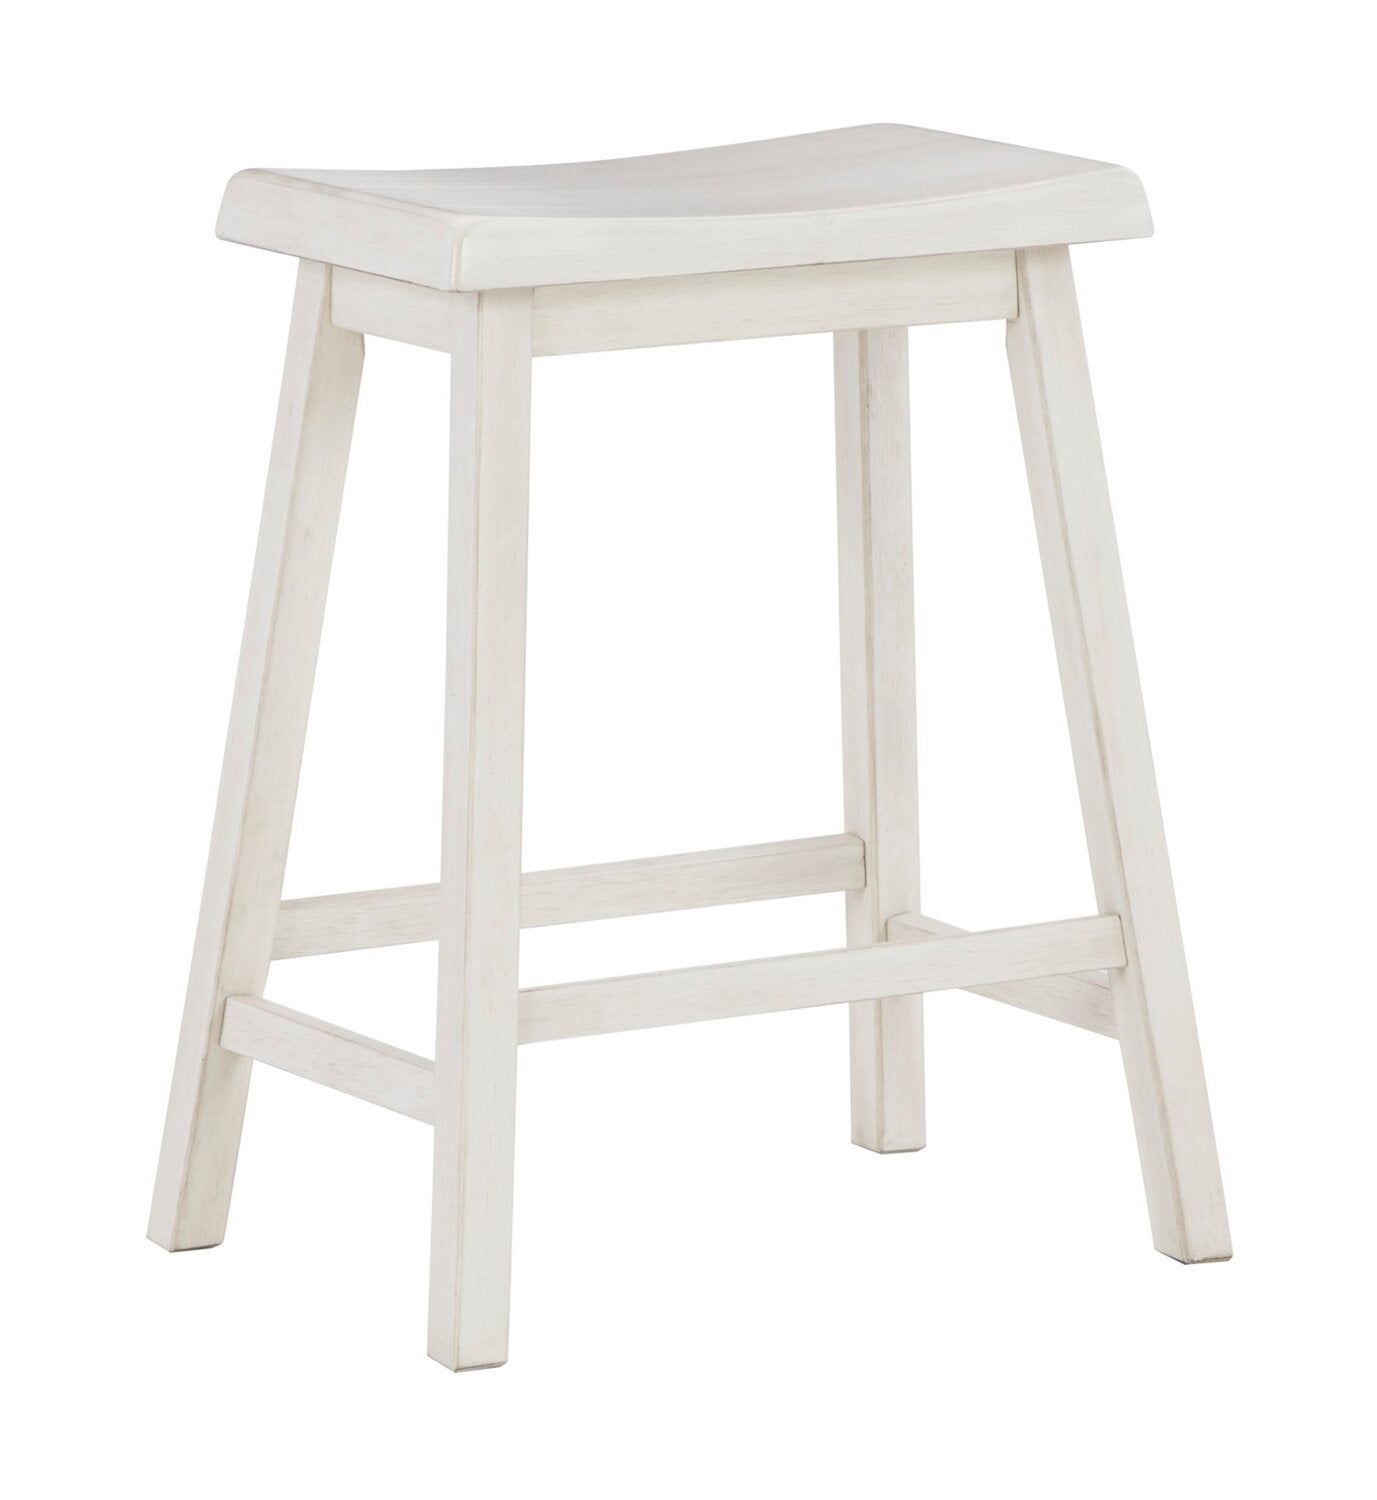 Wallace 5-Piece Counter-Height Dining Package with Stools - White